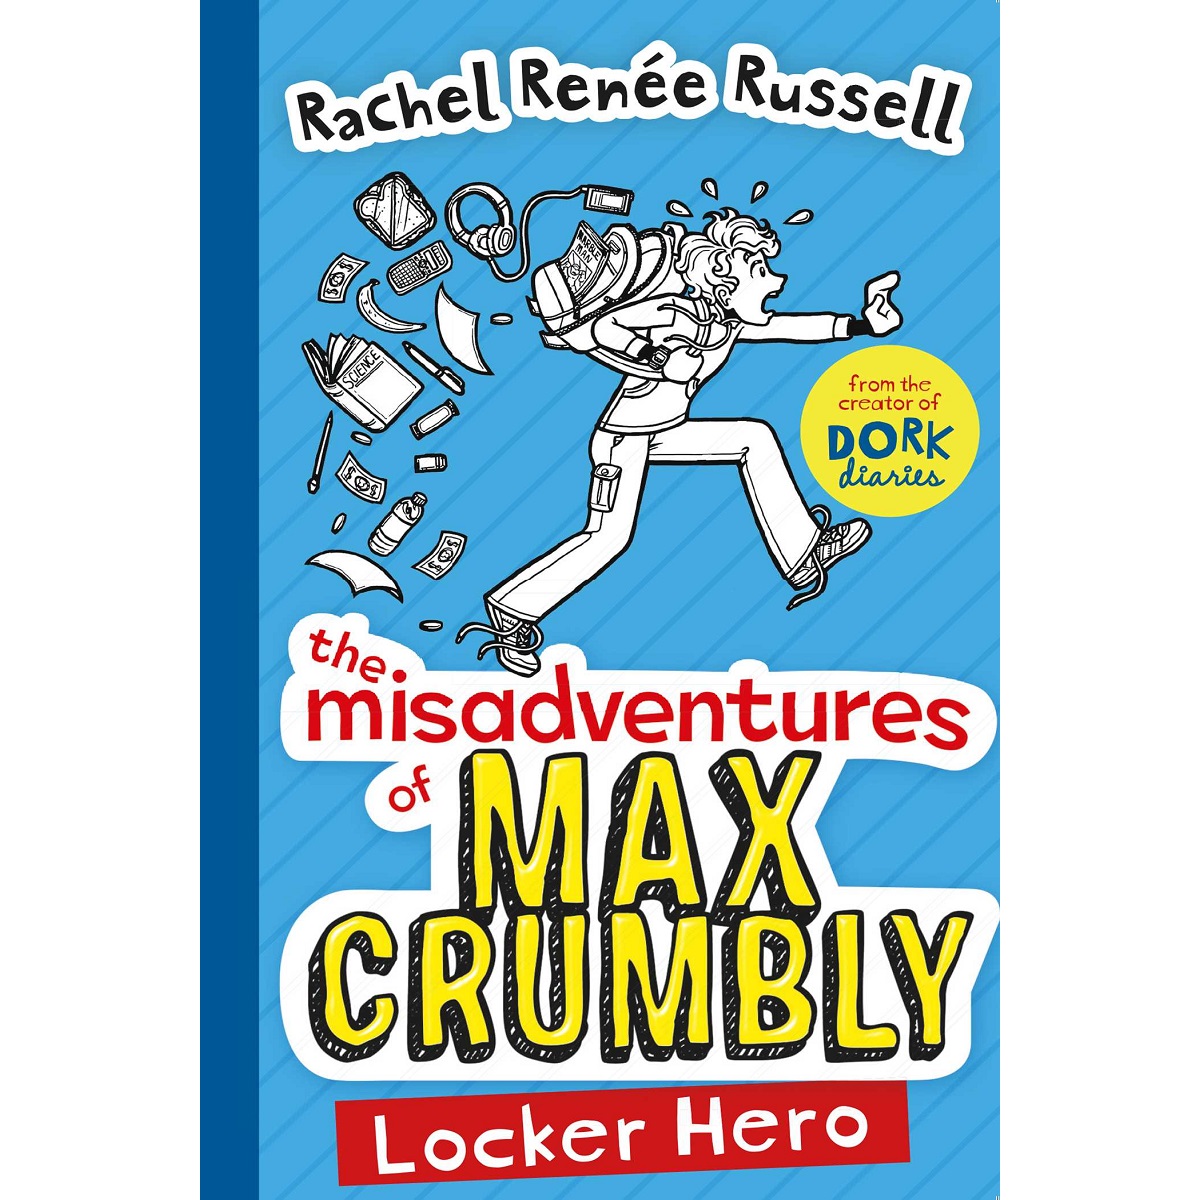 Dork Diaries: Misadventures of Max Crumbly by Rachel Renée Russell